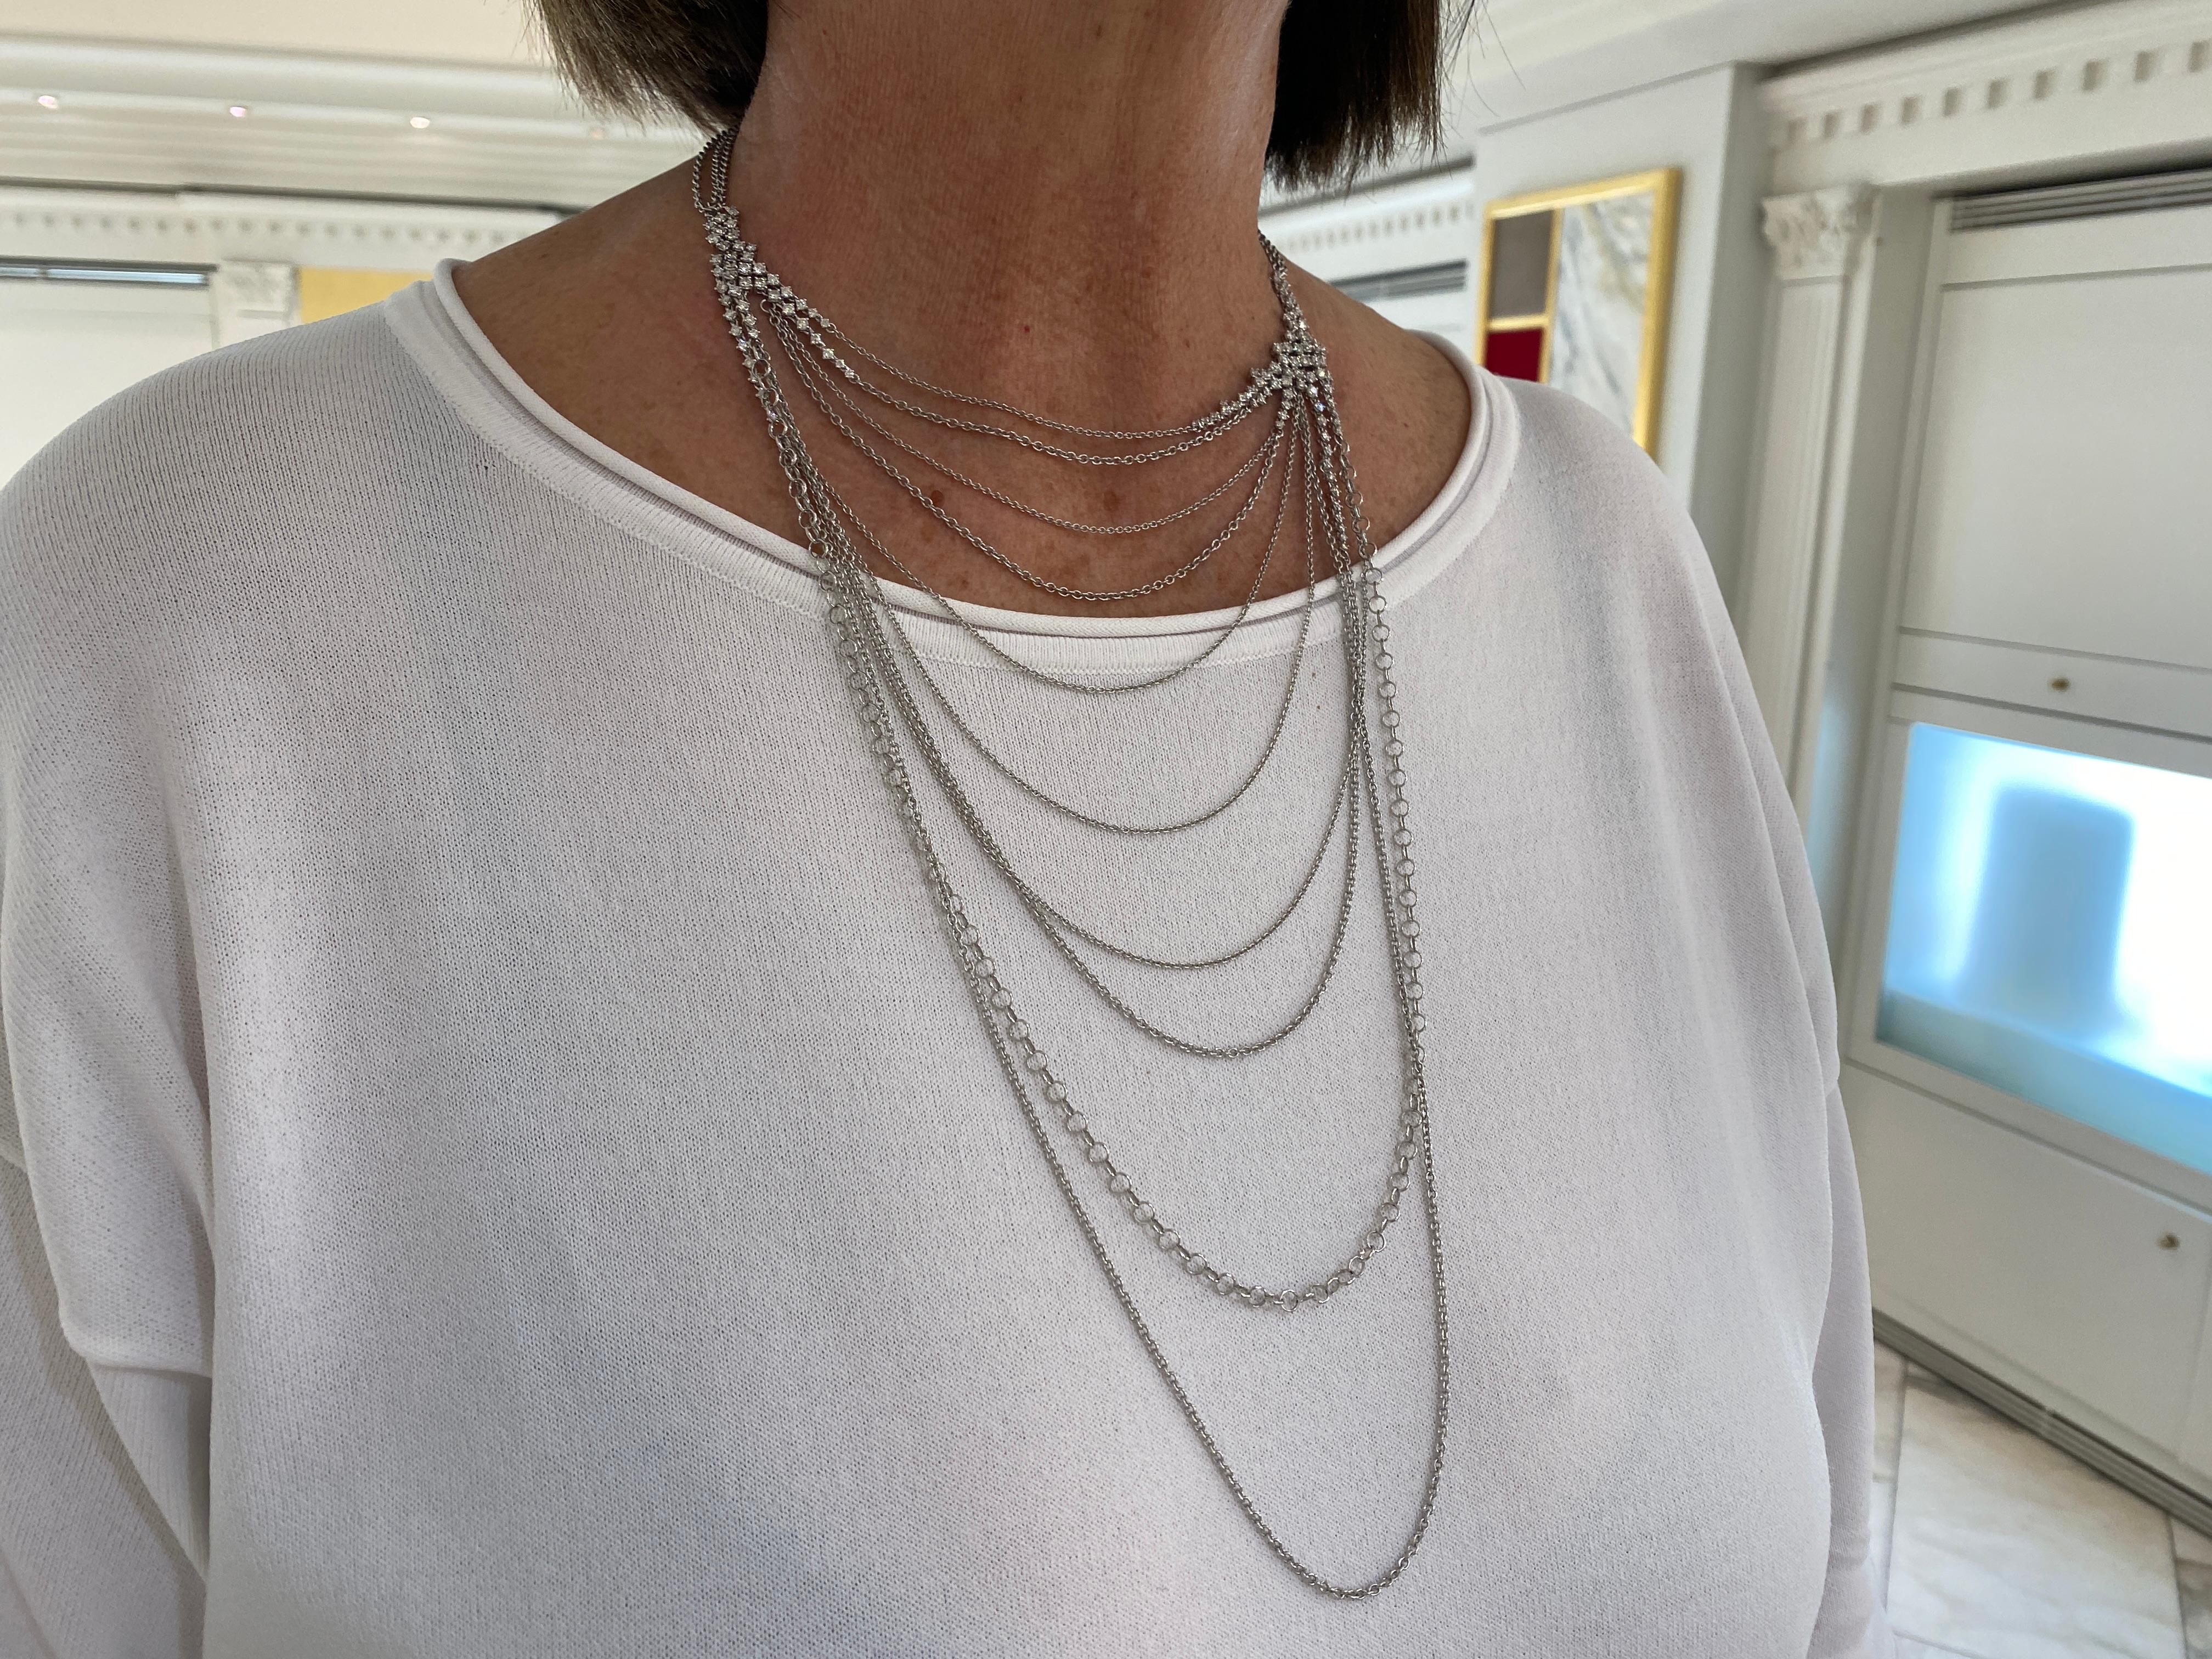 Fratelli Staurino signed long necklace made of 18kt white gold with natural brilliant-cut diamonds for ct 4.18

Welcome to our jewelry collection, where every piece tells a story of timeless elegance and unparalleled craftsmanship. As a family-run